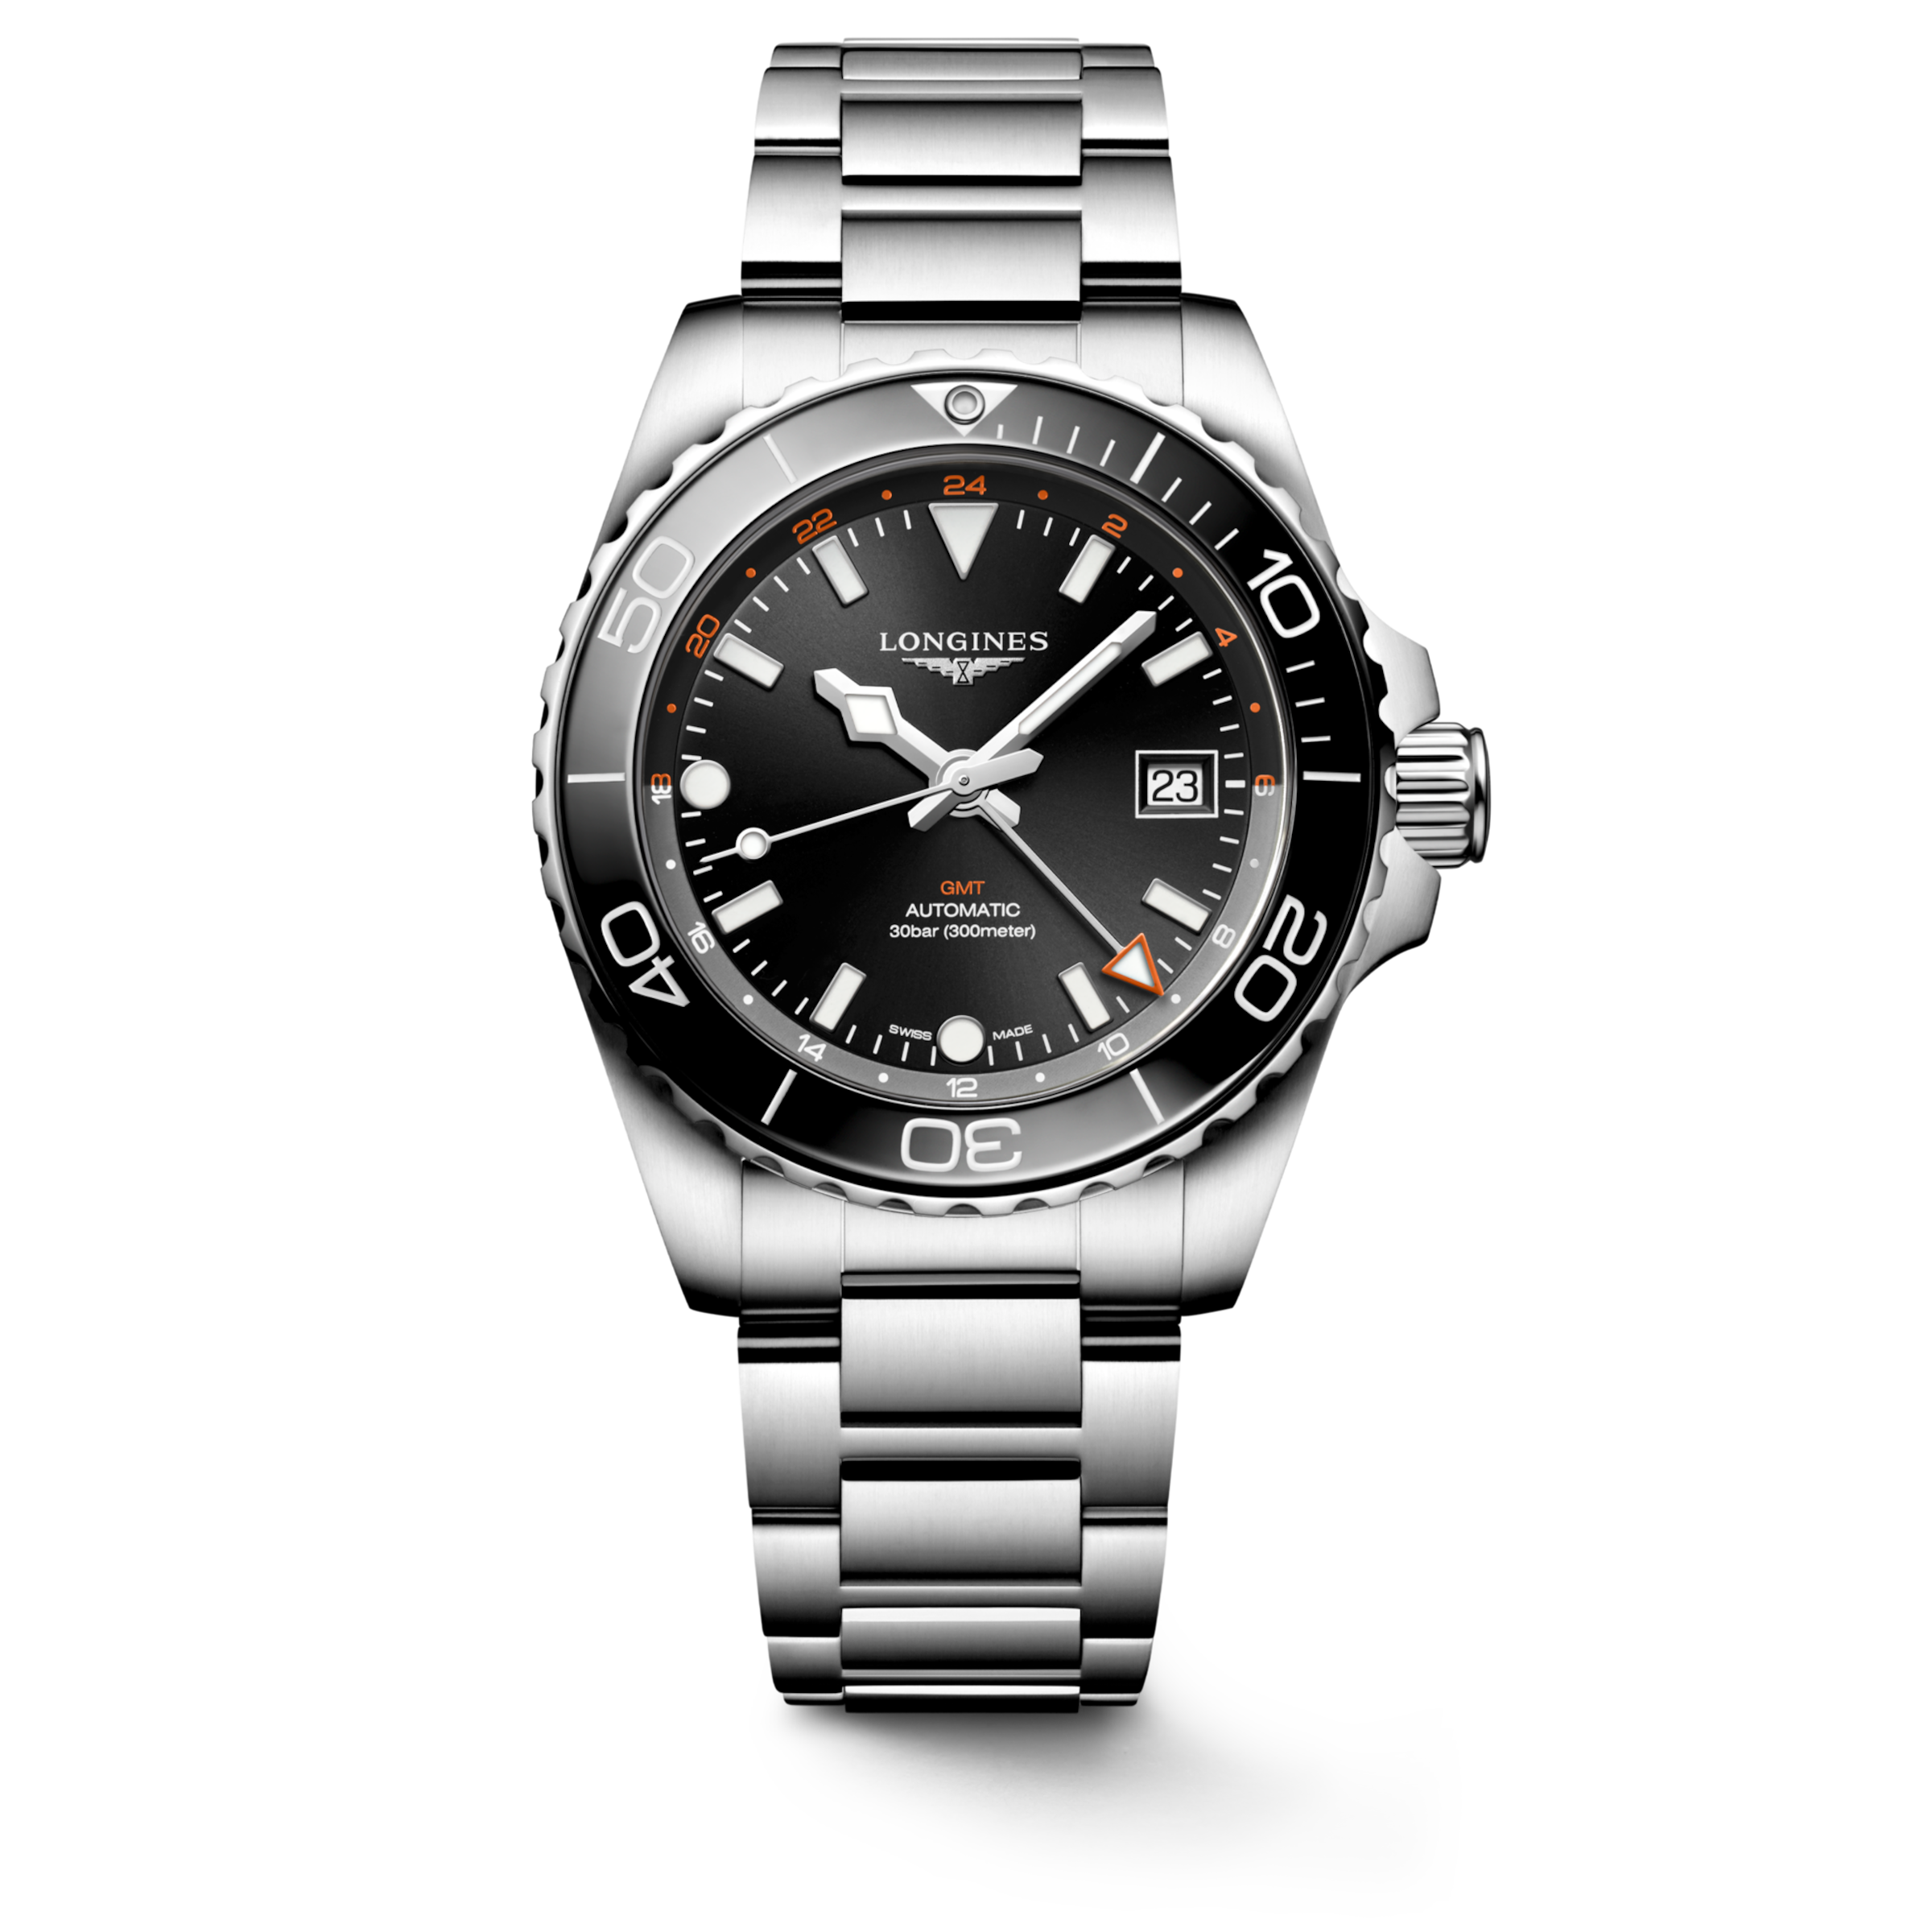 Longines HYDROCONQUEST Automatic Stainless steel and ceramic bezel Watch - L3.790.4.56.6